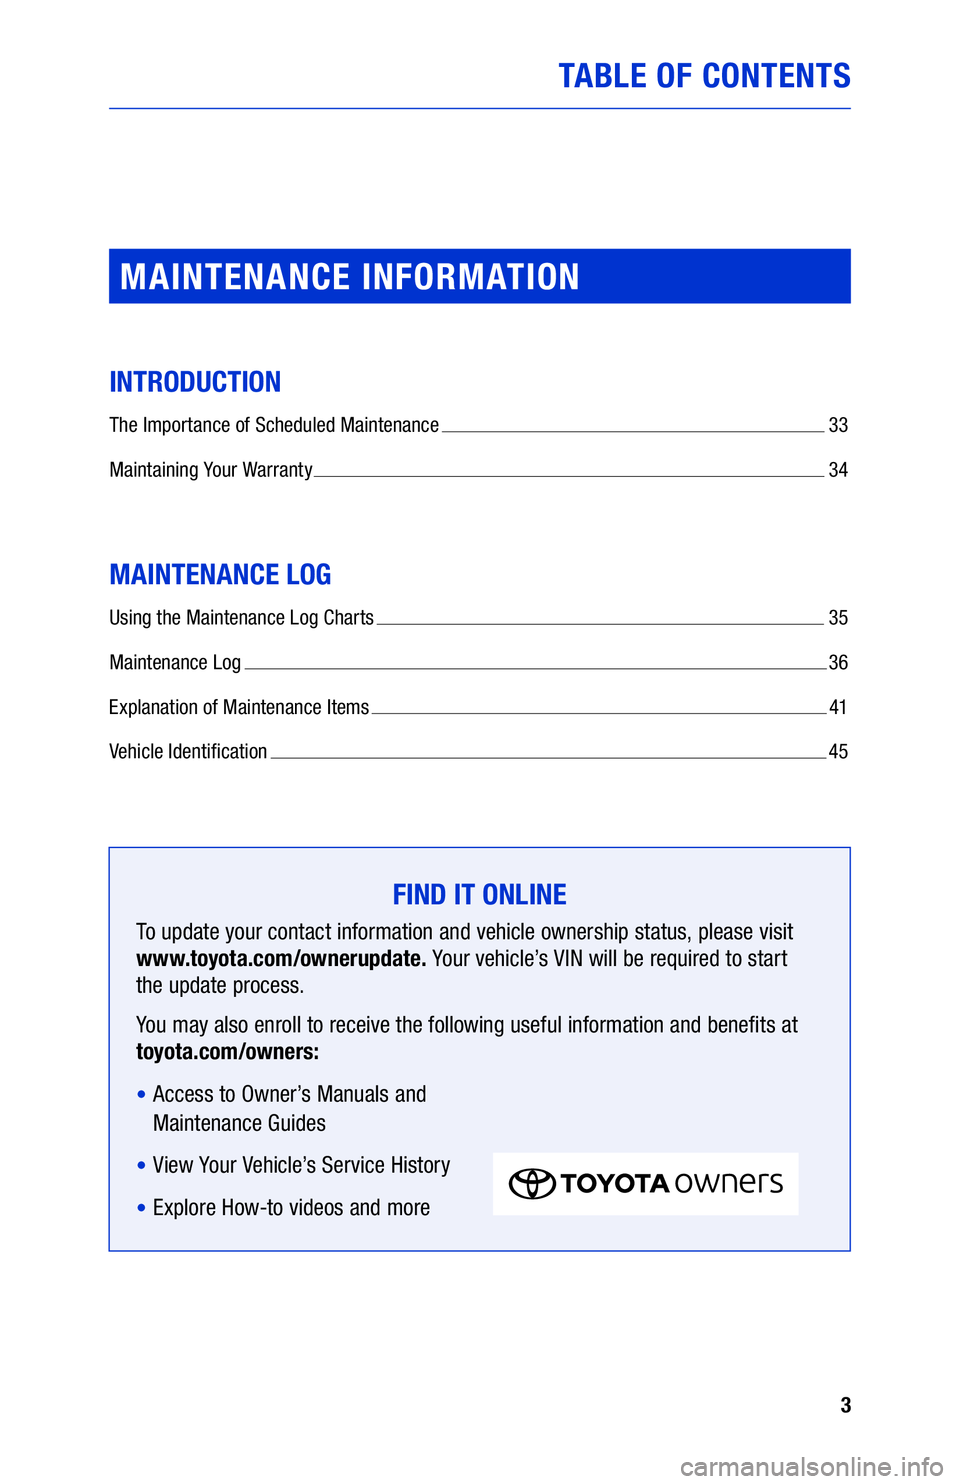 TOYOTA GT86 2019  Warranties & Maintenance Guides (in English) 3
TABLE OF CONTENTS
FIND IT ONLINE
To update your contact information and vehicle ownership status, please visit  
www.toyota.com/ownerupdate. Your vehicle’s VIN will be required to start   
the upd